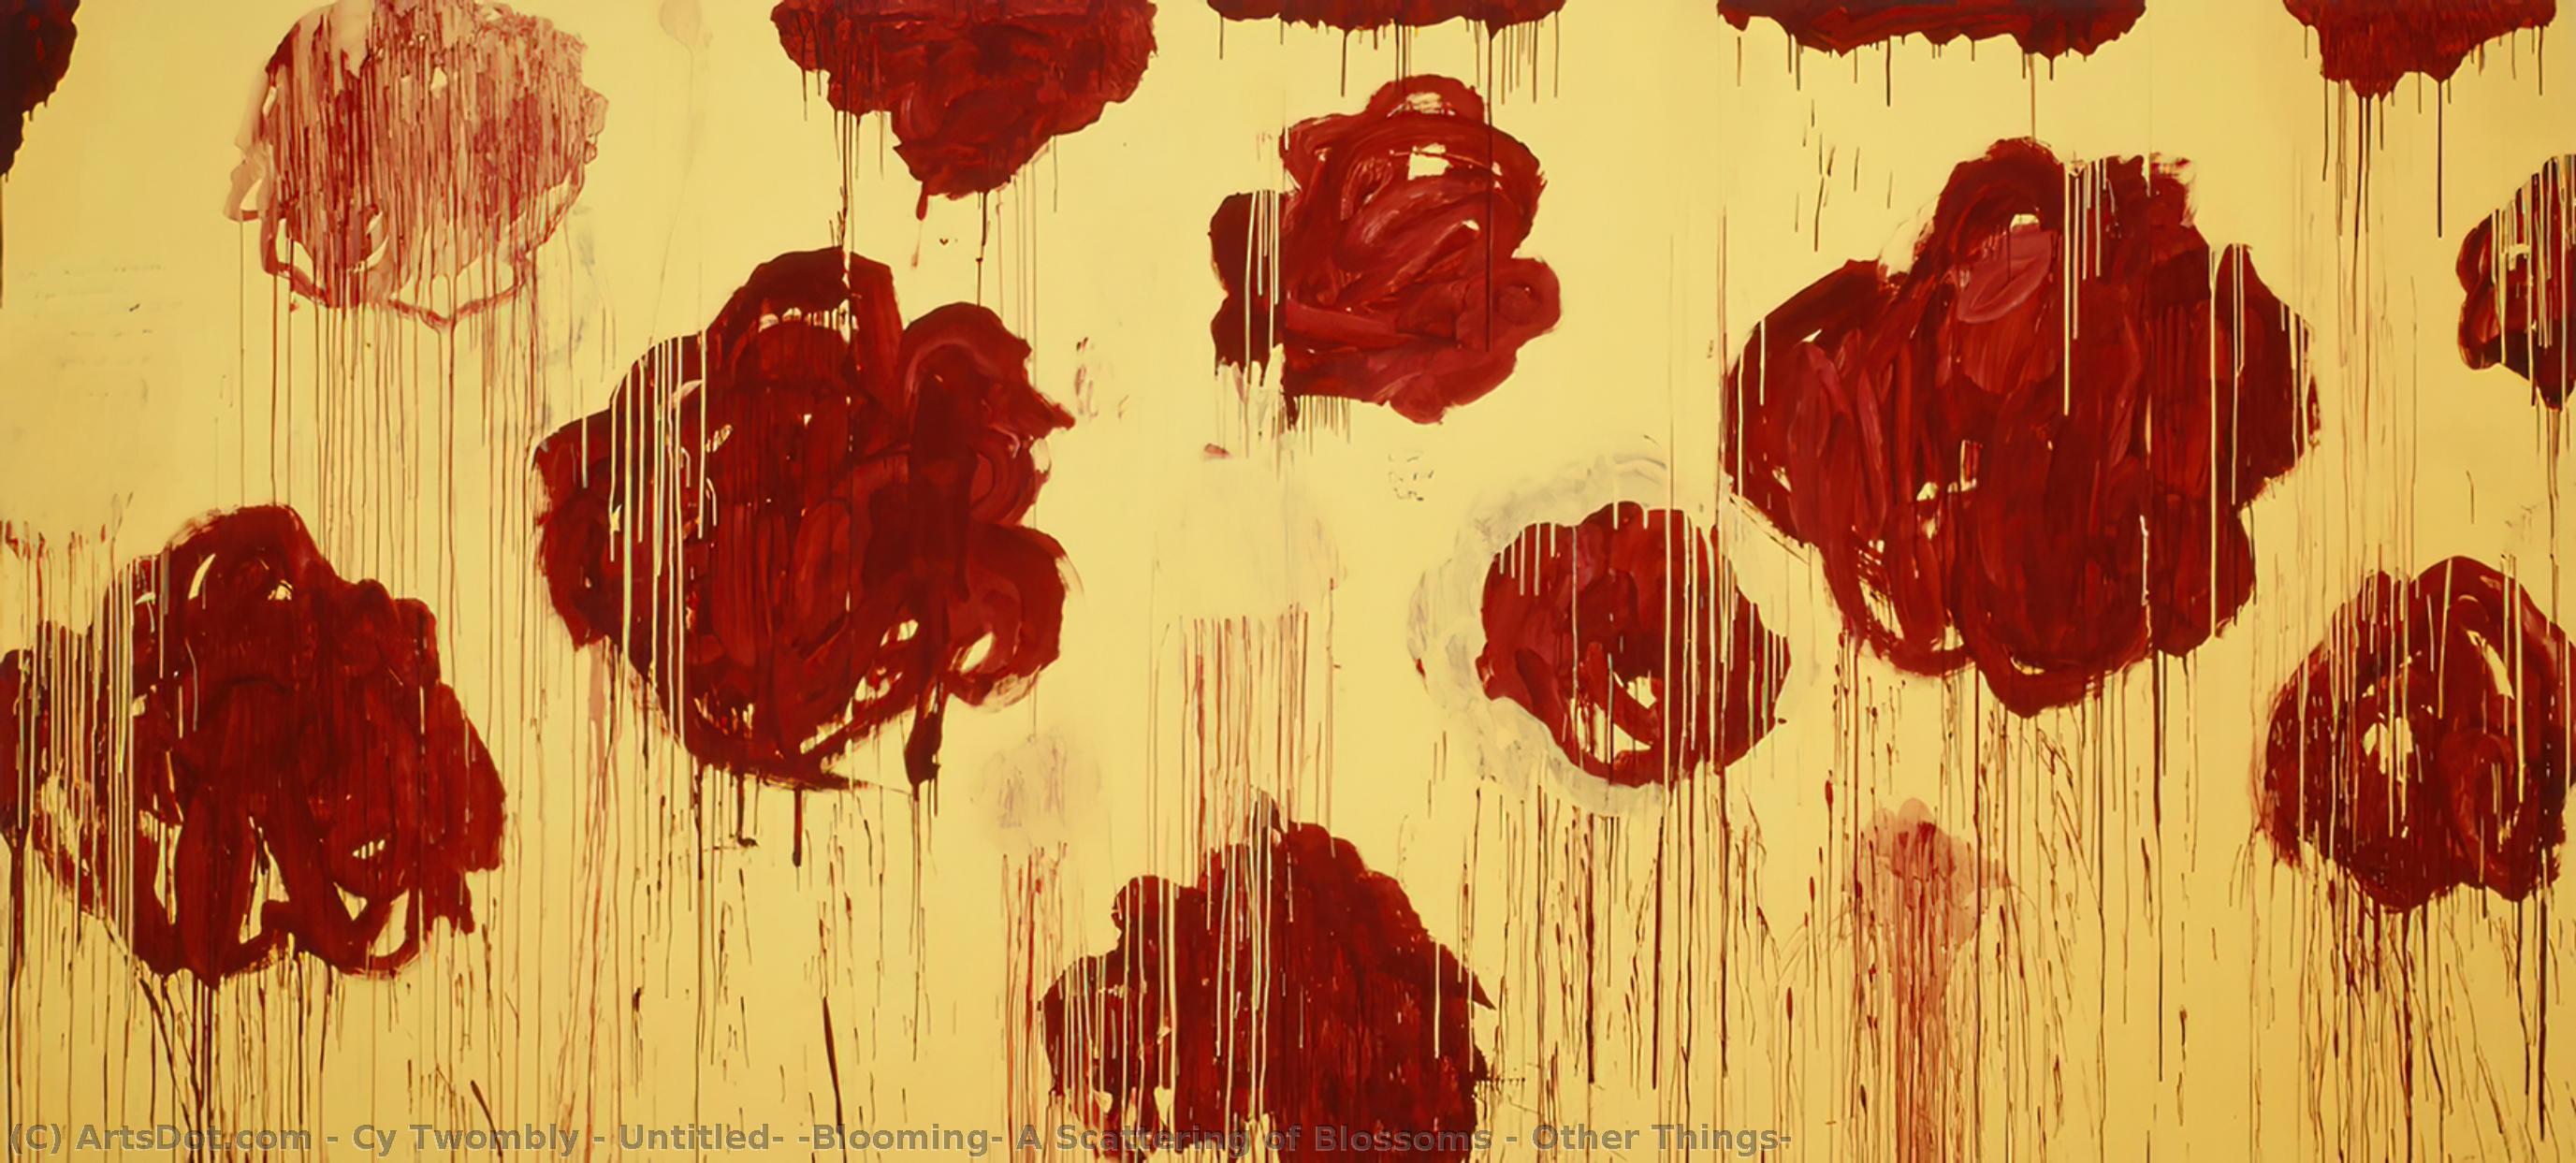 WikiOO.org - Encyclopedia of Fine Arts - Malba, Artwork Cy Twombly - Untitled, (Blooming, A Scattering of Blossoms ^ Other Things)